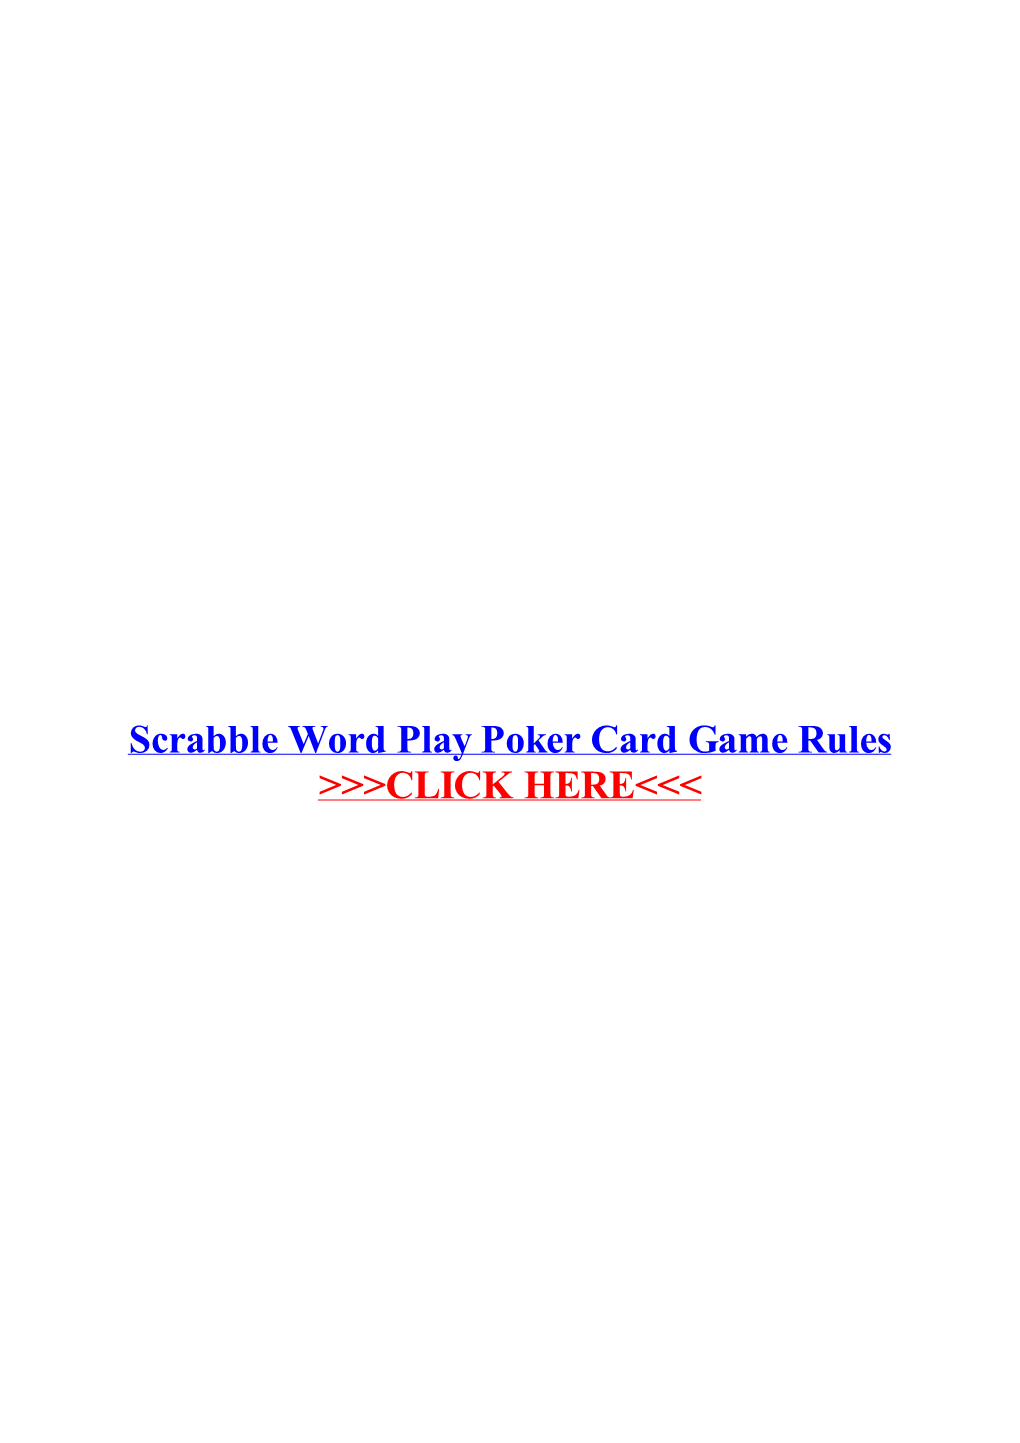 Scrabble Word Play Poker Card Game Rules